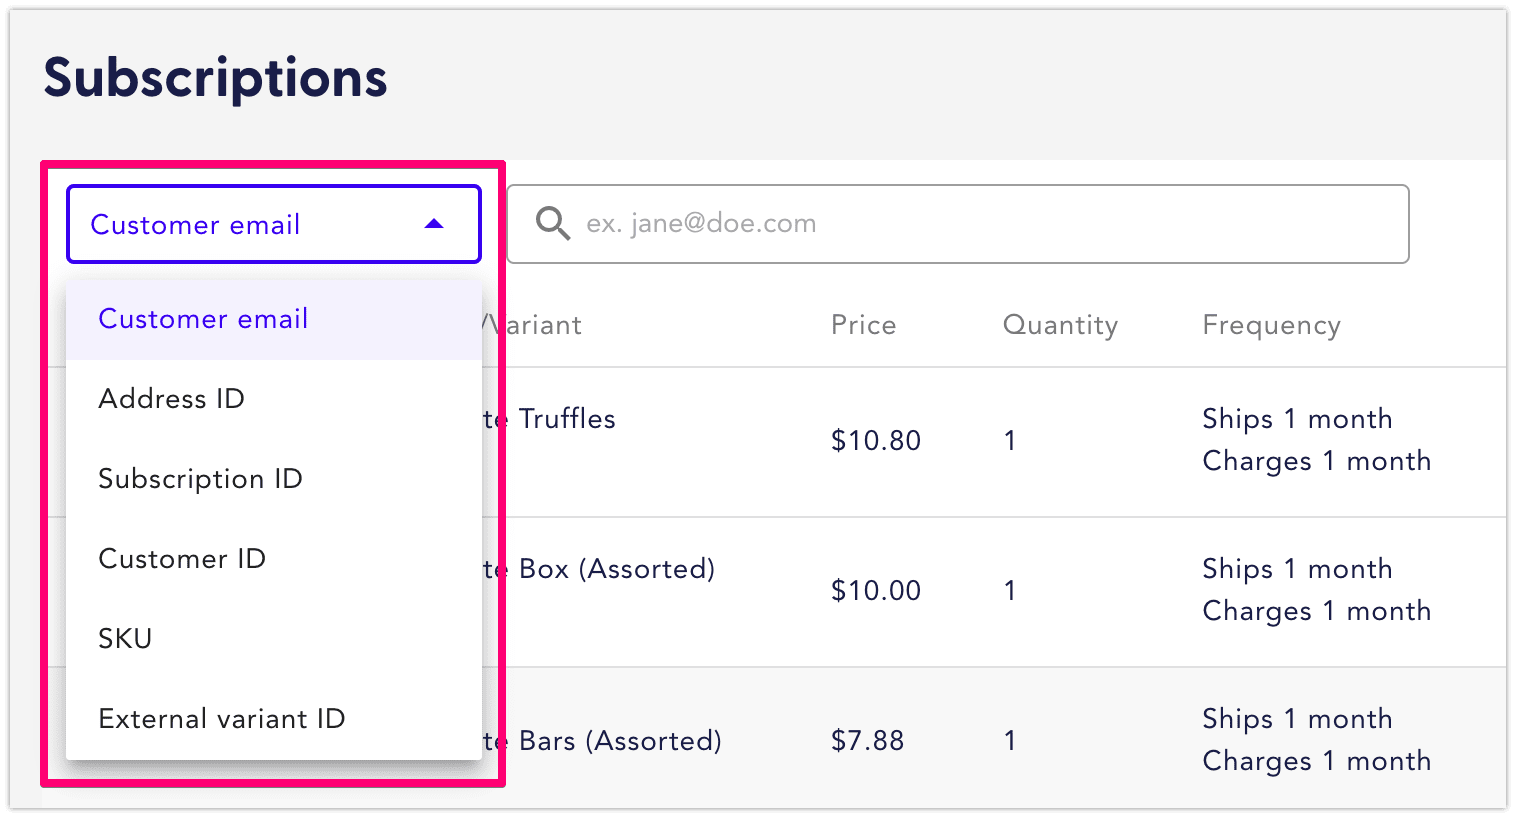 Subscriptions_tab_in_Recharge_showing_the_search_options.png